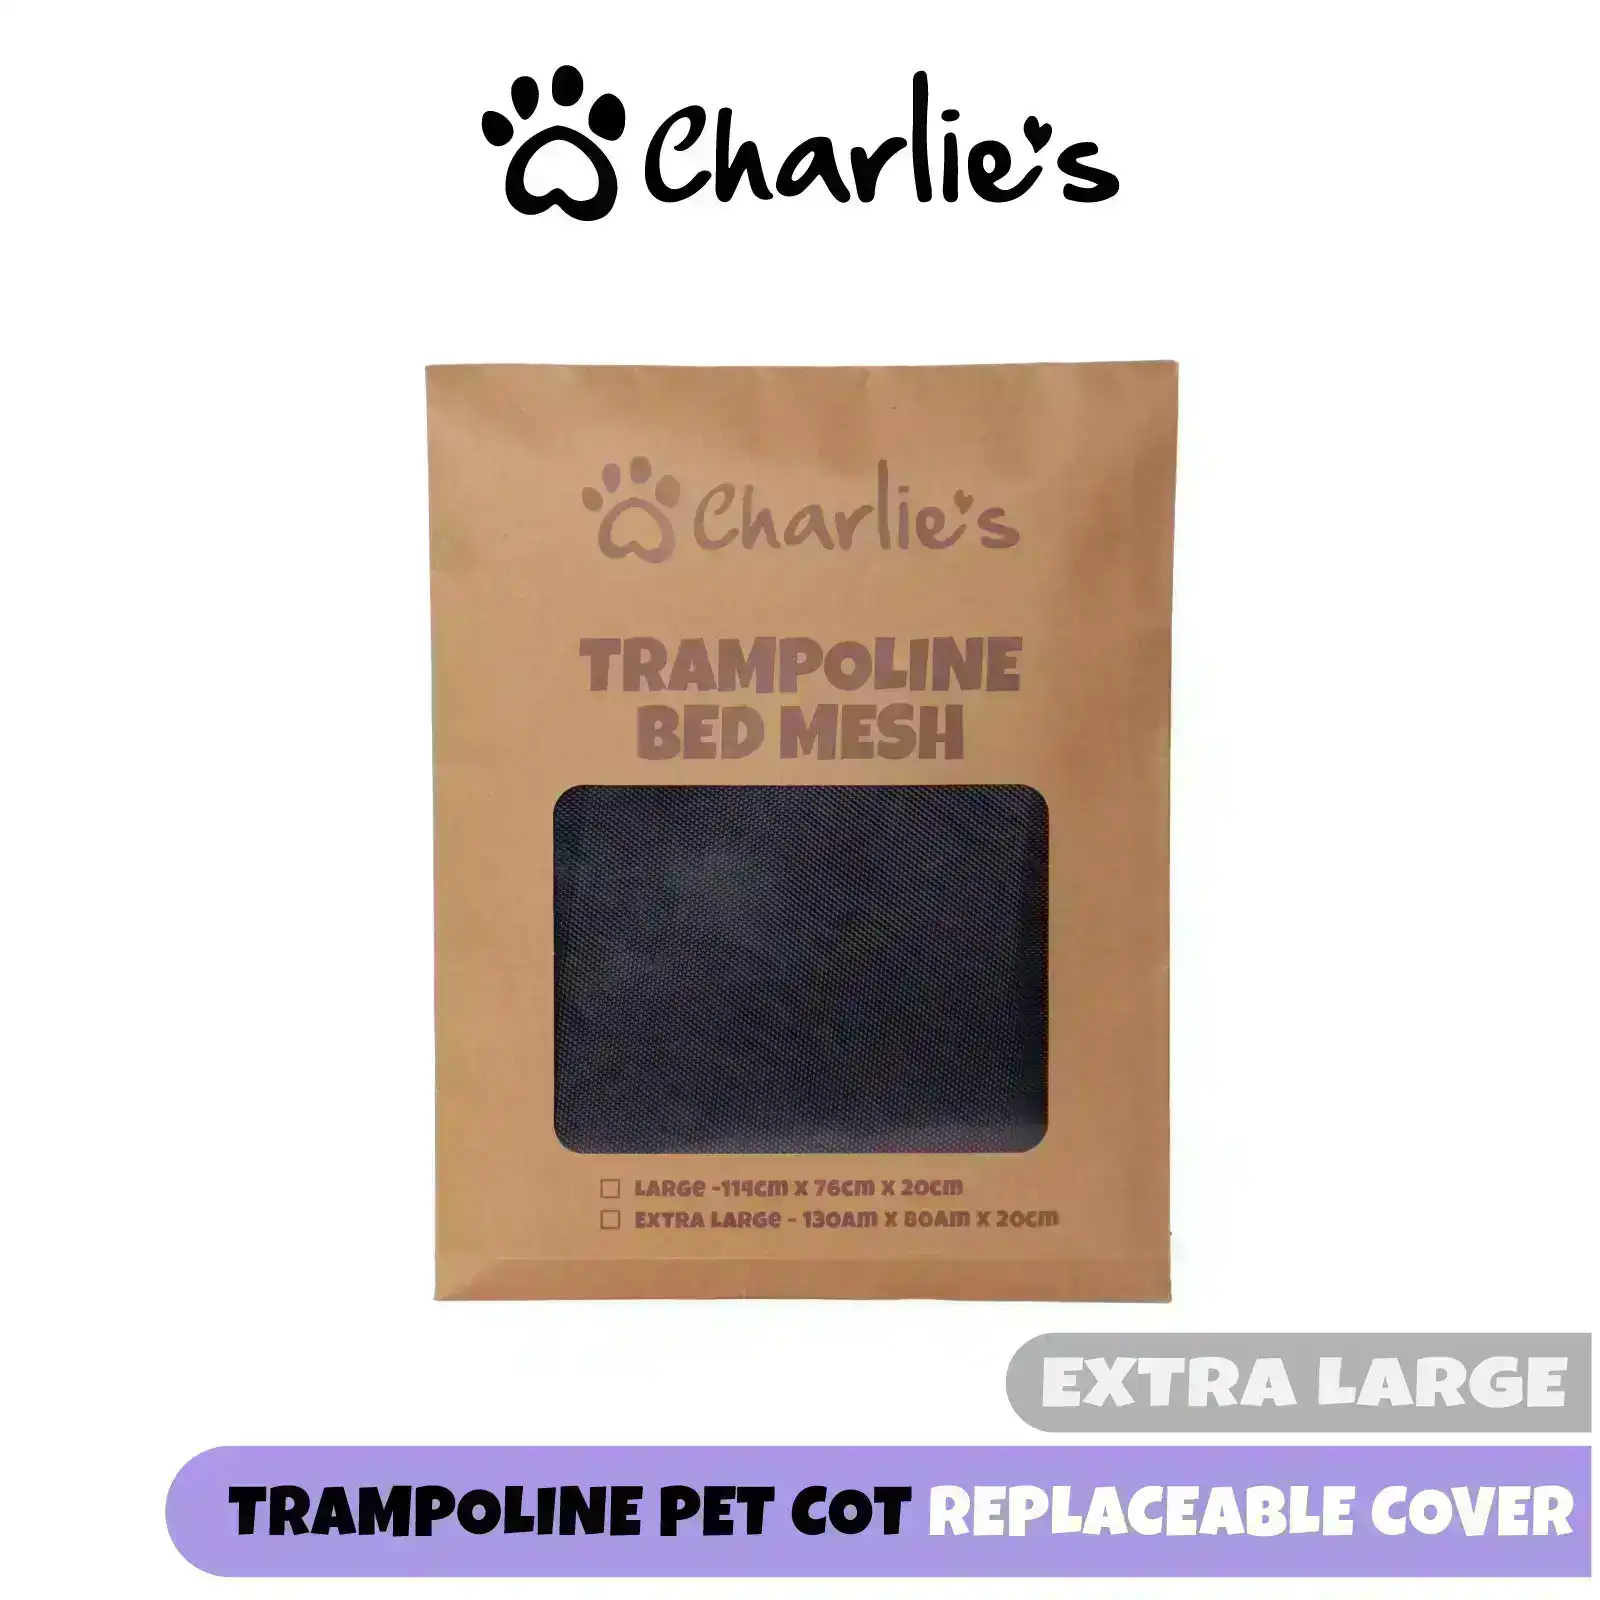 Charlie’s Trampoline Pet Cot Replaceable Cover Black Extra Large 130 x 80 x 20cm